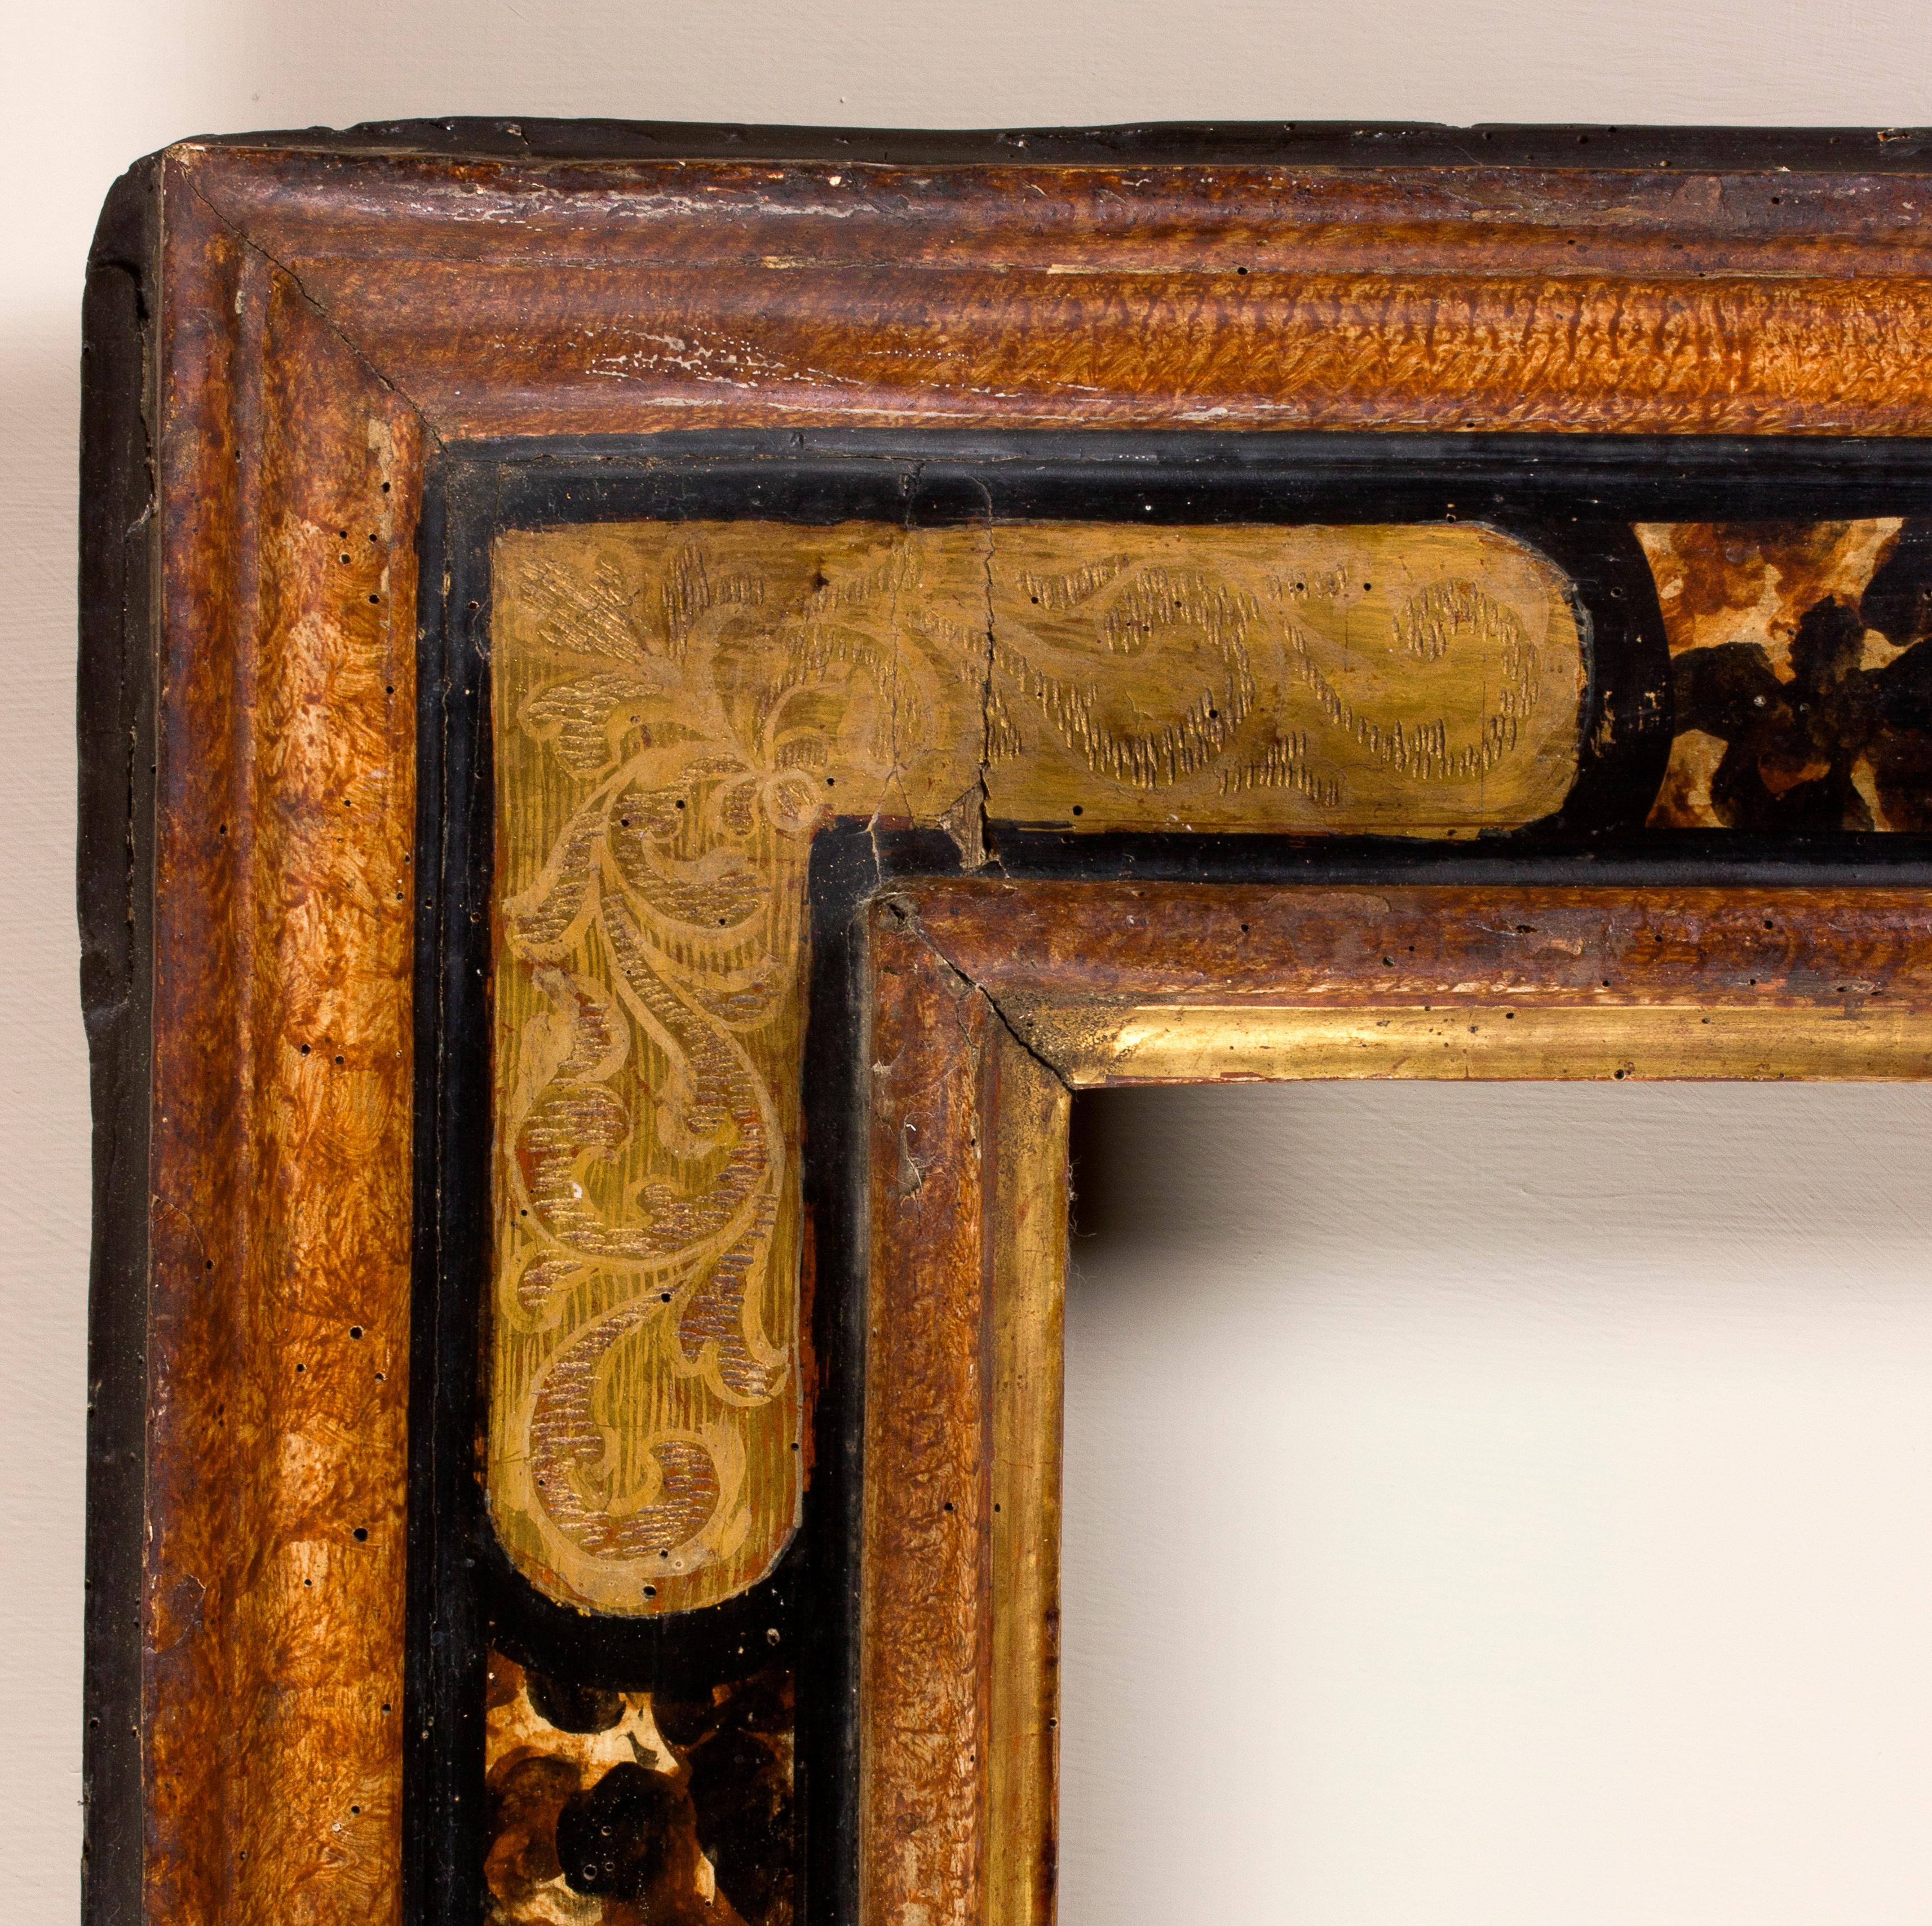 Marche frame, Italy, end of 16th century
Faux-tortoiseshell and faux marble painted cassetta frame, golden corners painted with leaf patterns.
Inside: 70.8 x 50 cm; outside: 99.2 x 77.6 cm.
Depth is the wide of the band.
 